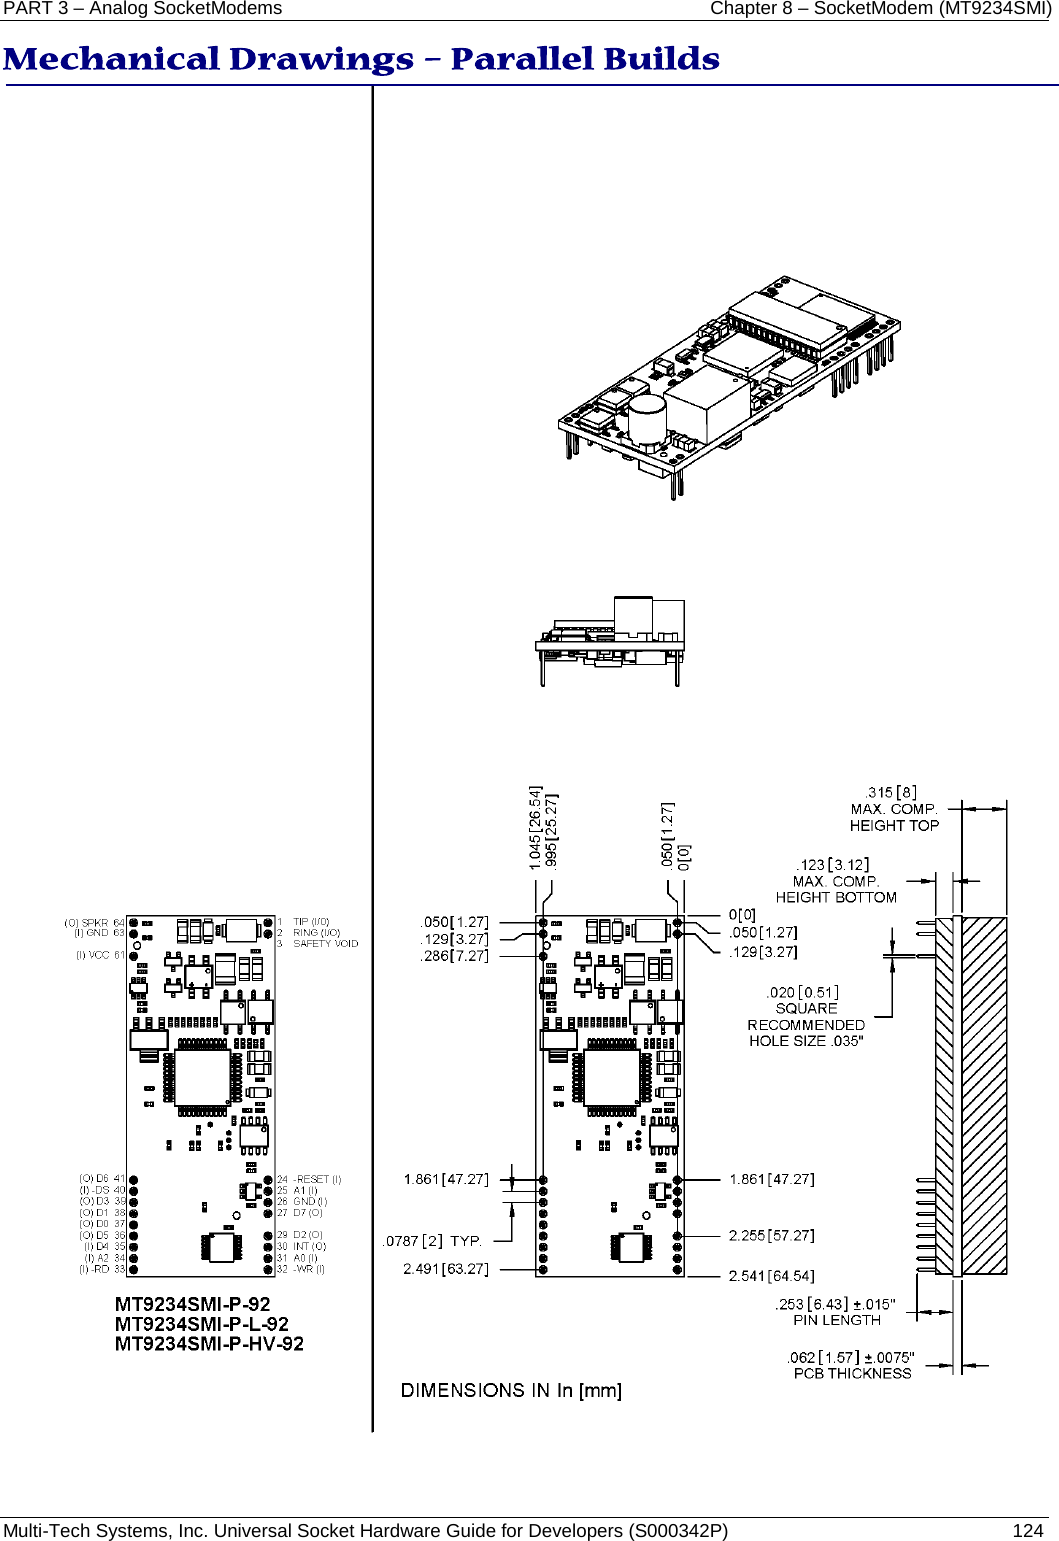 PART 3 – Analog SocketModems Chapter 8 – SocketModem (MT9234SMI) Multi-Tech Systems, Inc. Universal Socket Hardware Guide for Developers (S000342P)  124  Mechanical Drawings – Parallel Builds      